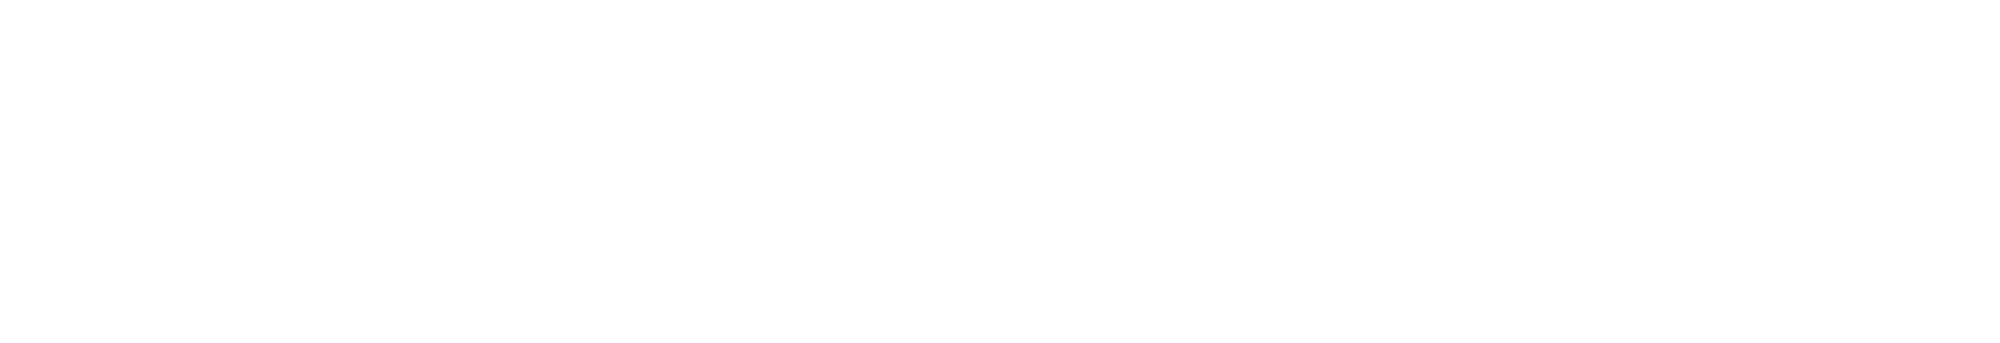 RaedyBuiltBusiness.com - Your Path to Financial Freedom!